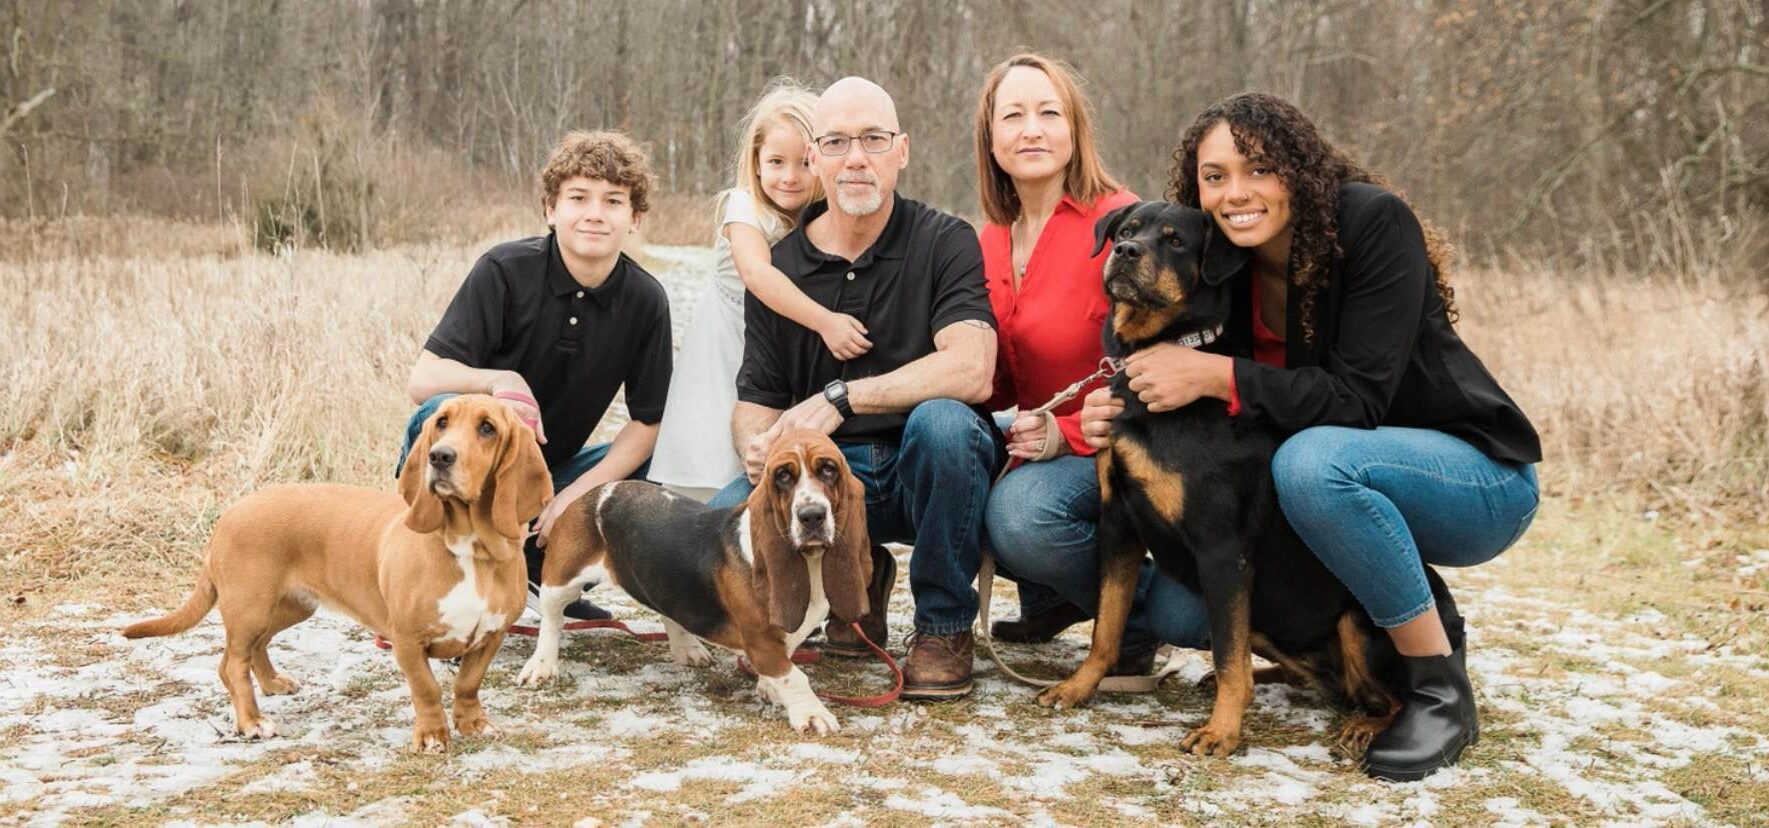 Header image displaying family and dogs